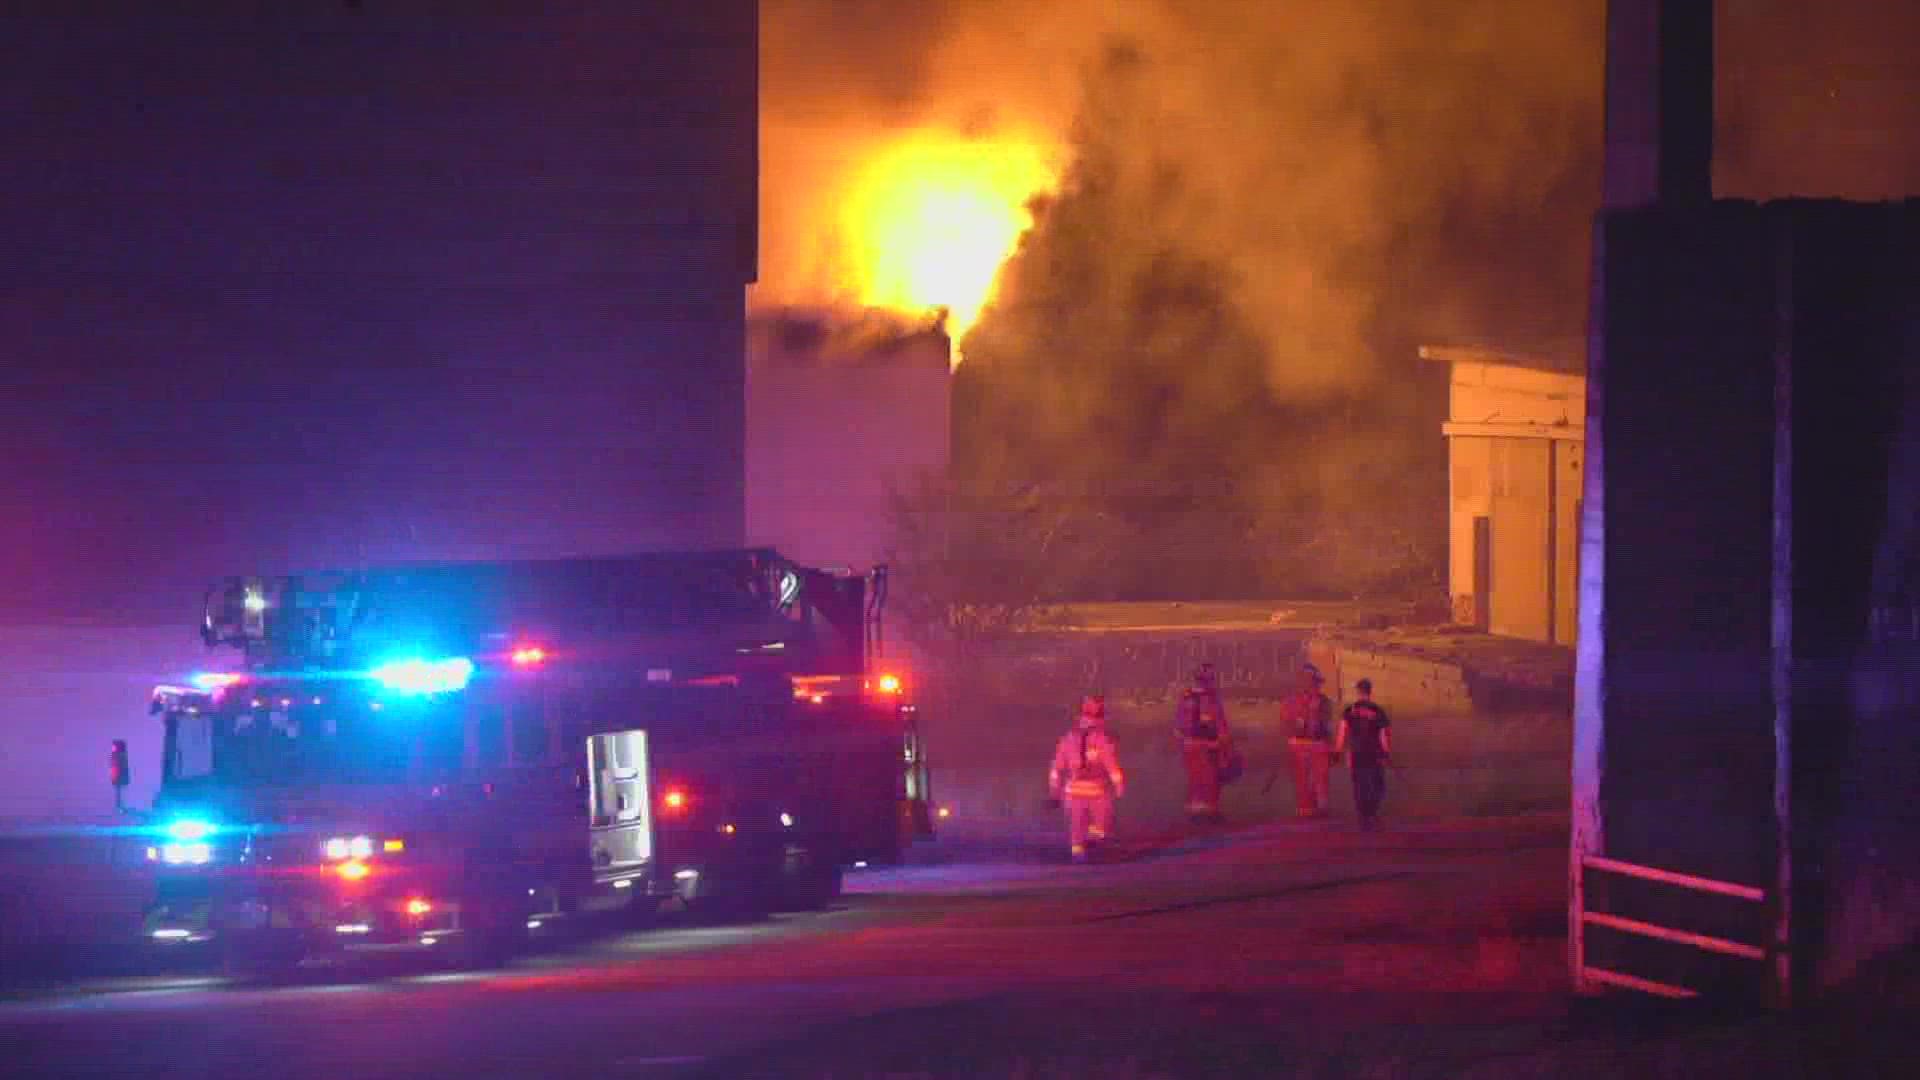 The fire started around 1:30 a.m. at a City of San Antonio tool yard on the northeast side of town.